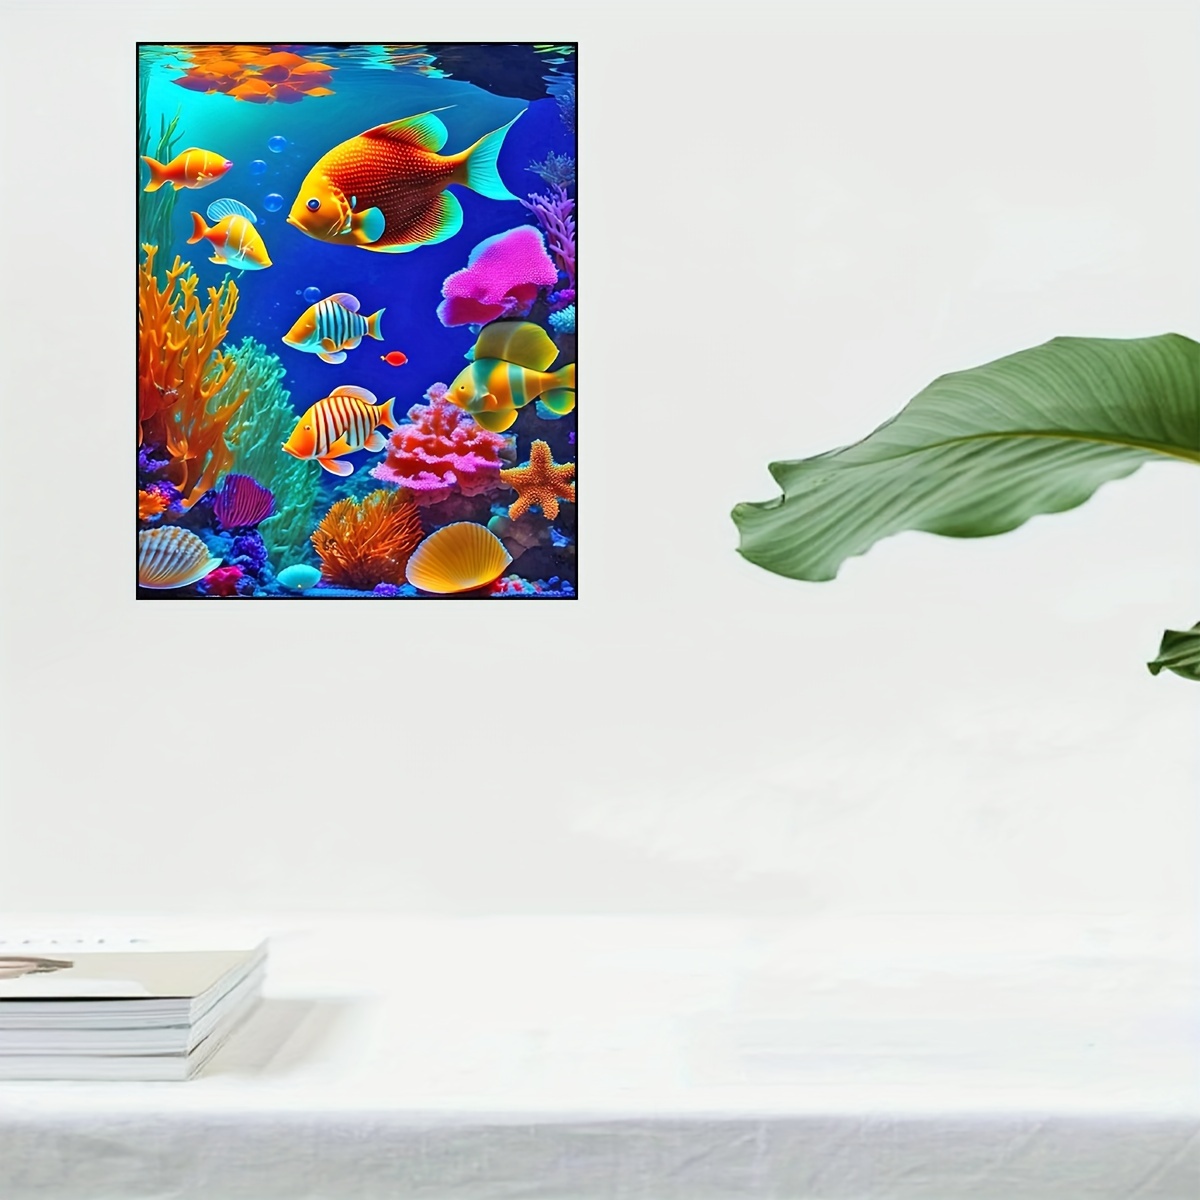 

1pc Diy Artificial Full Diamonds Art Painting Set, The Underwater World Pattern Diamonds Art For Home Wall Decoration And Gift 15.7*19.7in